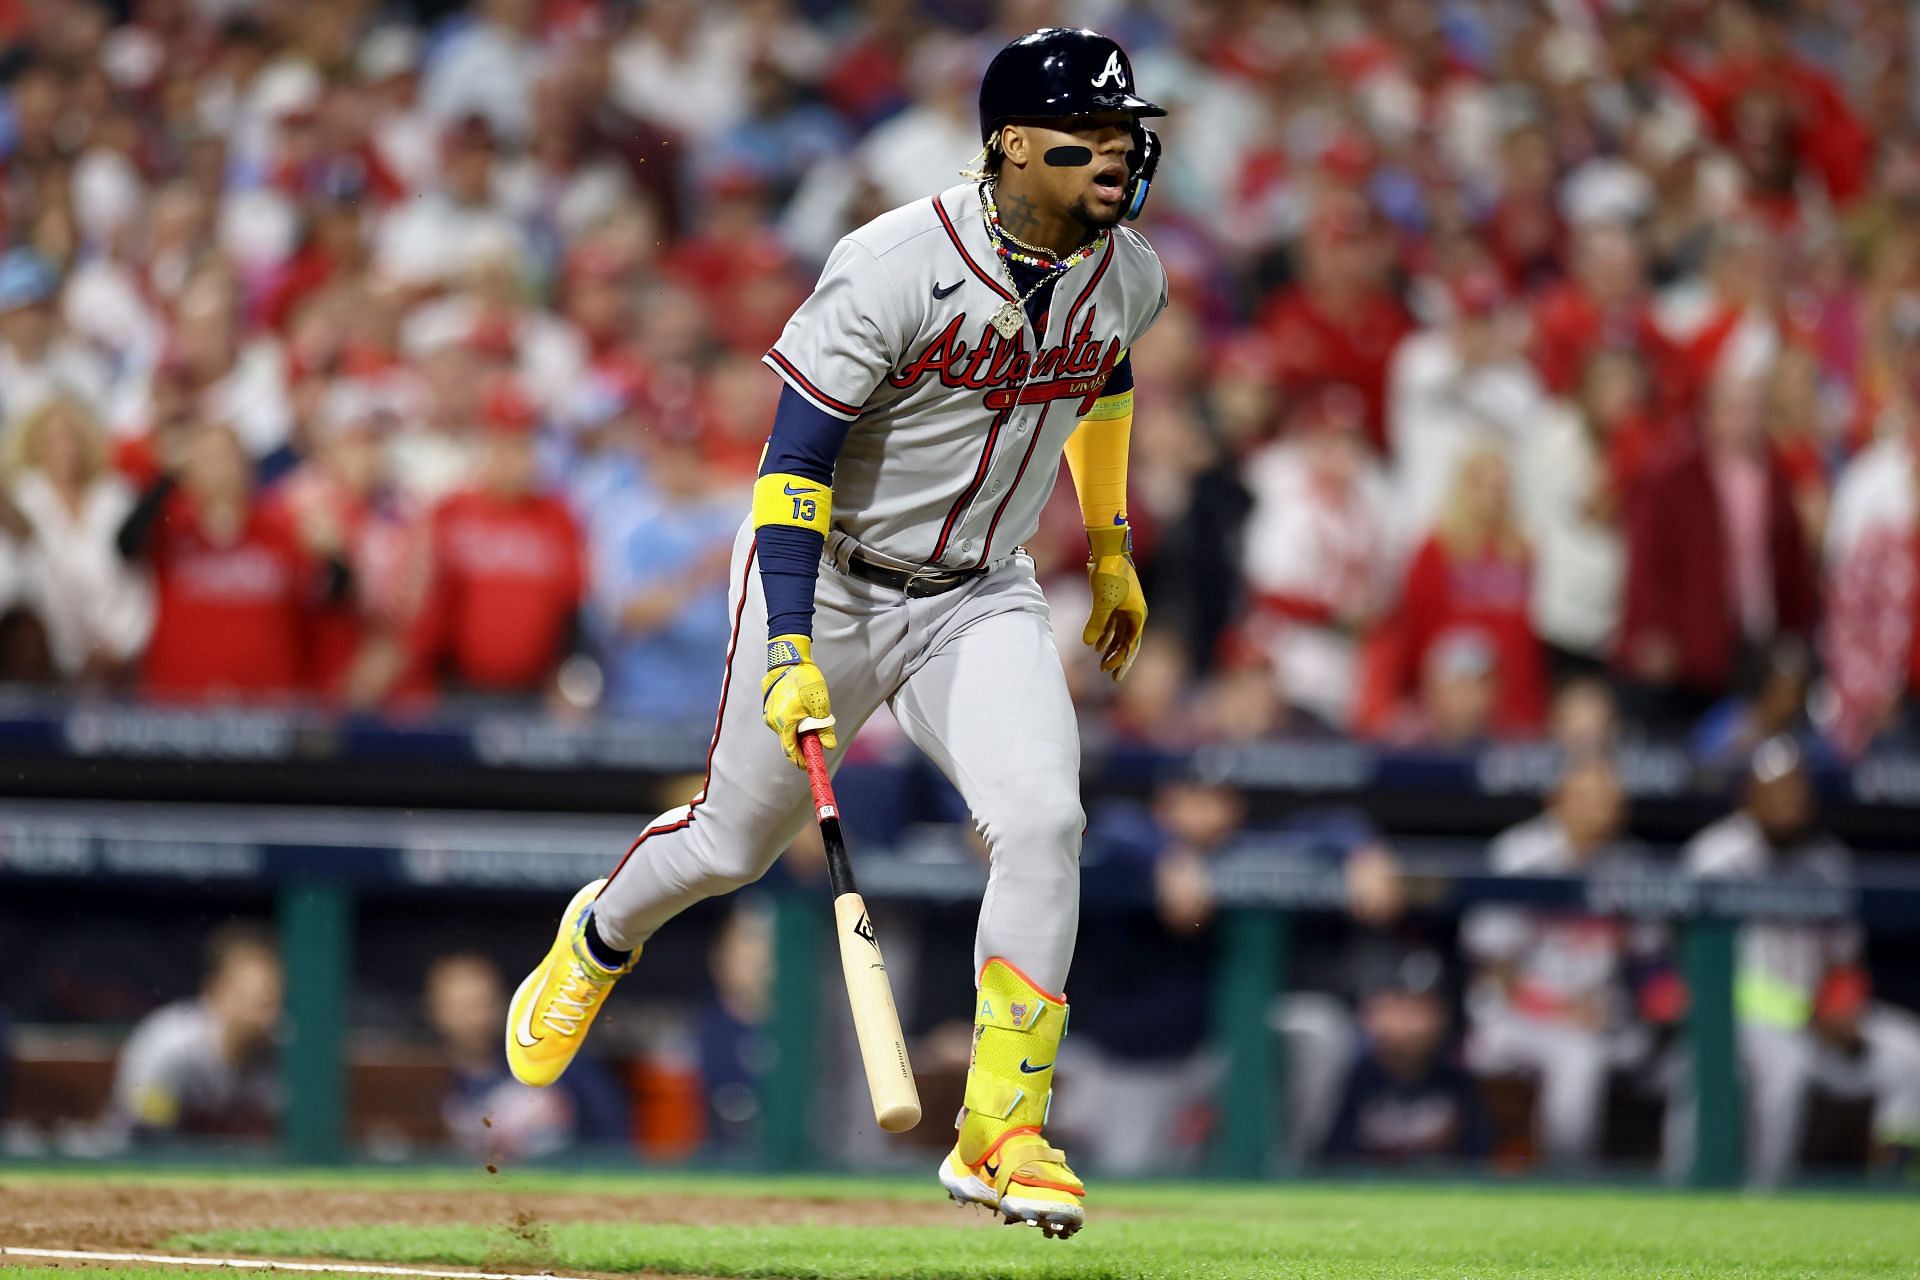 According to accounts from the interview between Ronald Acuna Jr. and Yancel Pujols, Acuna made critical comments about his former Braves teammate, Freddie Freeman back in 2022.